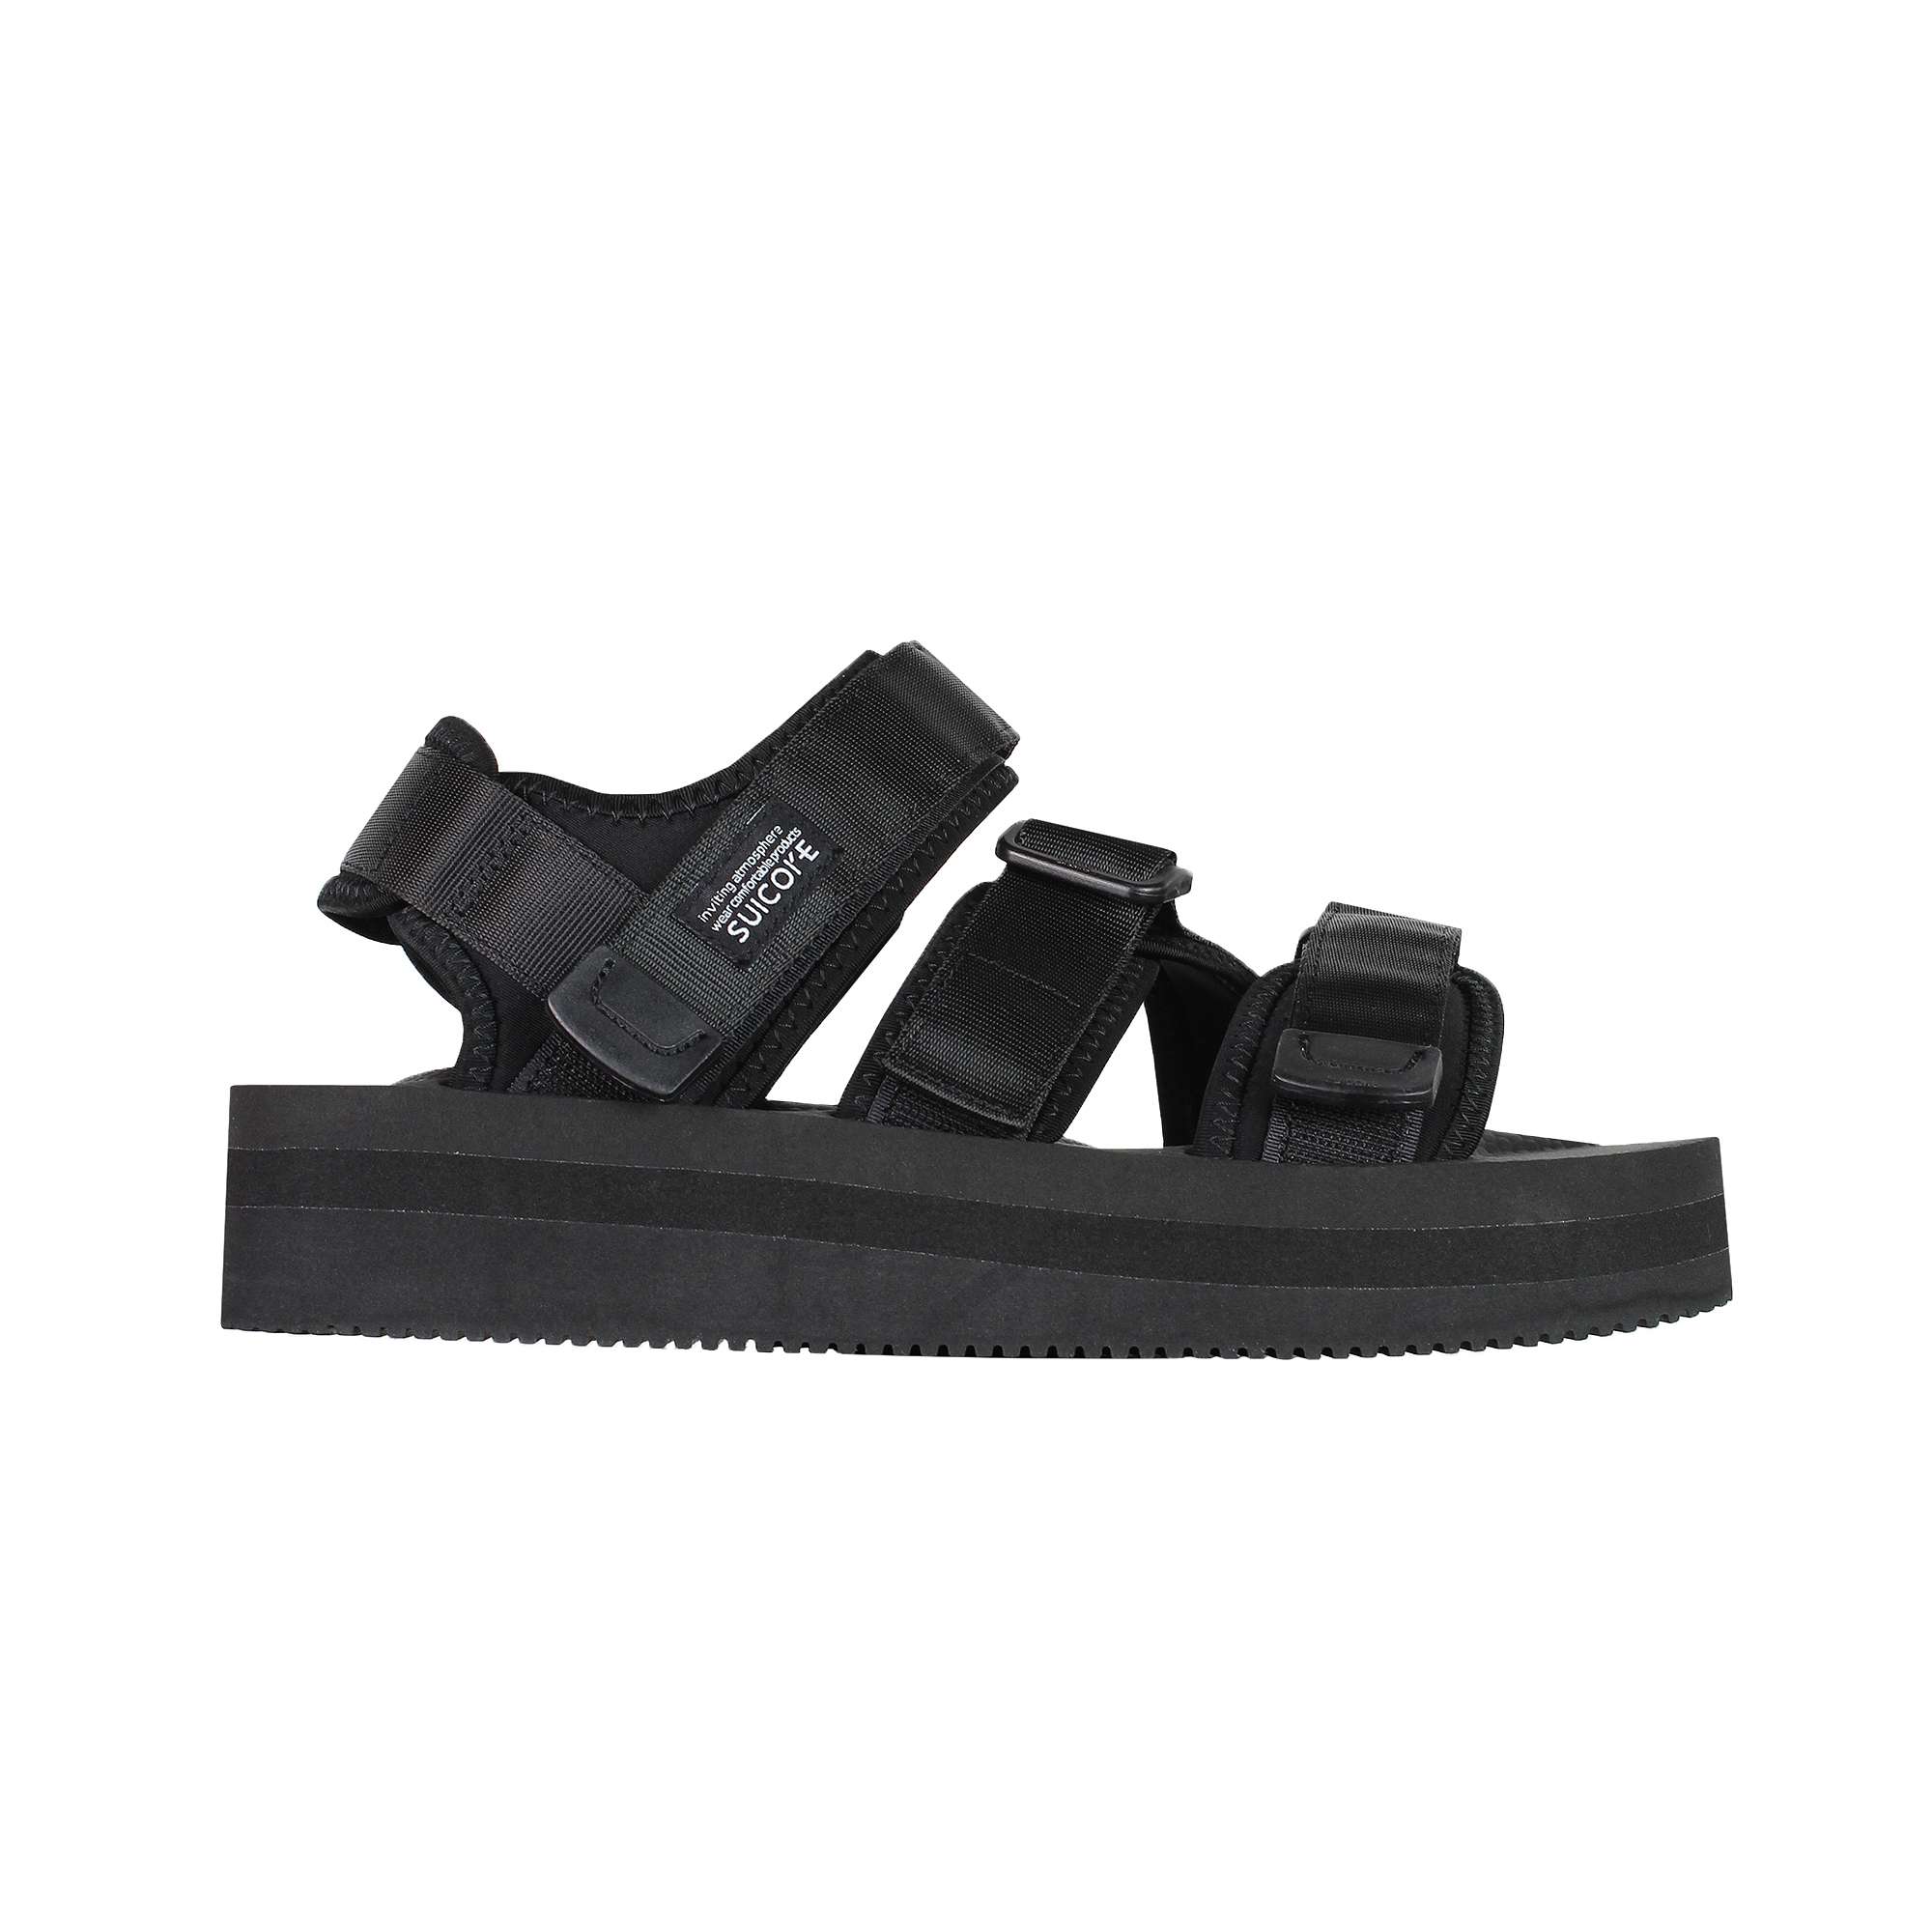 Kisee-Vpo | Suicoke | ACT STORE Online